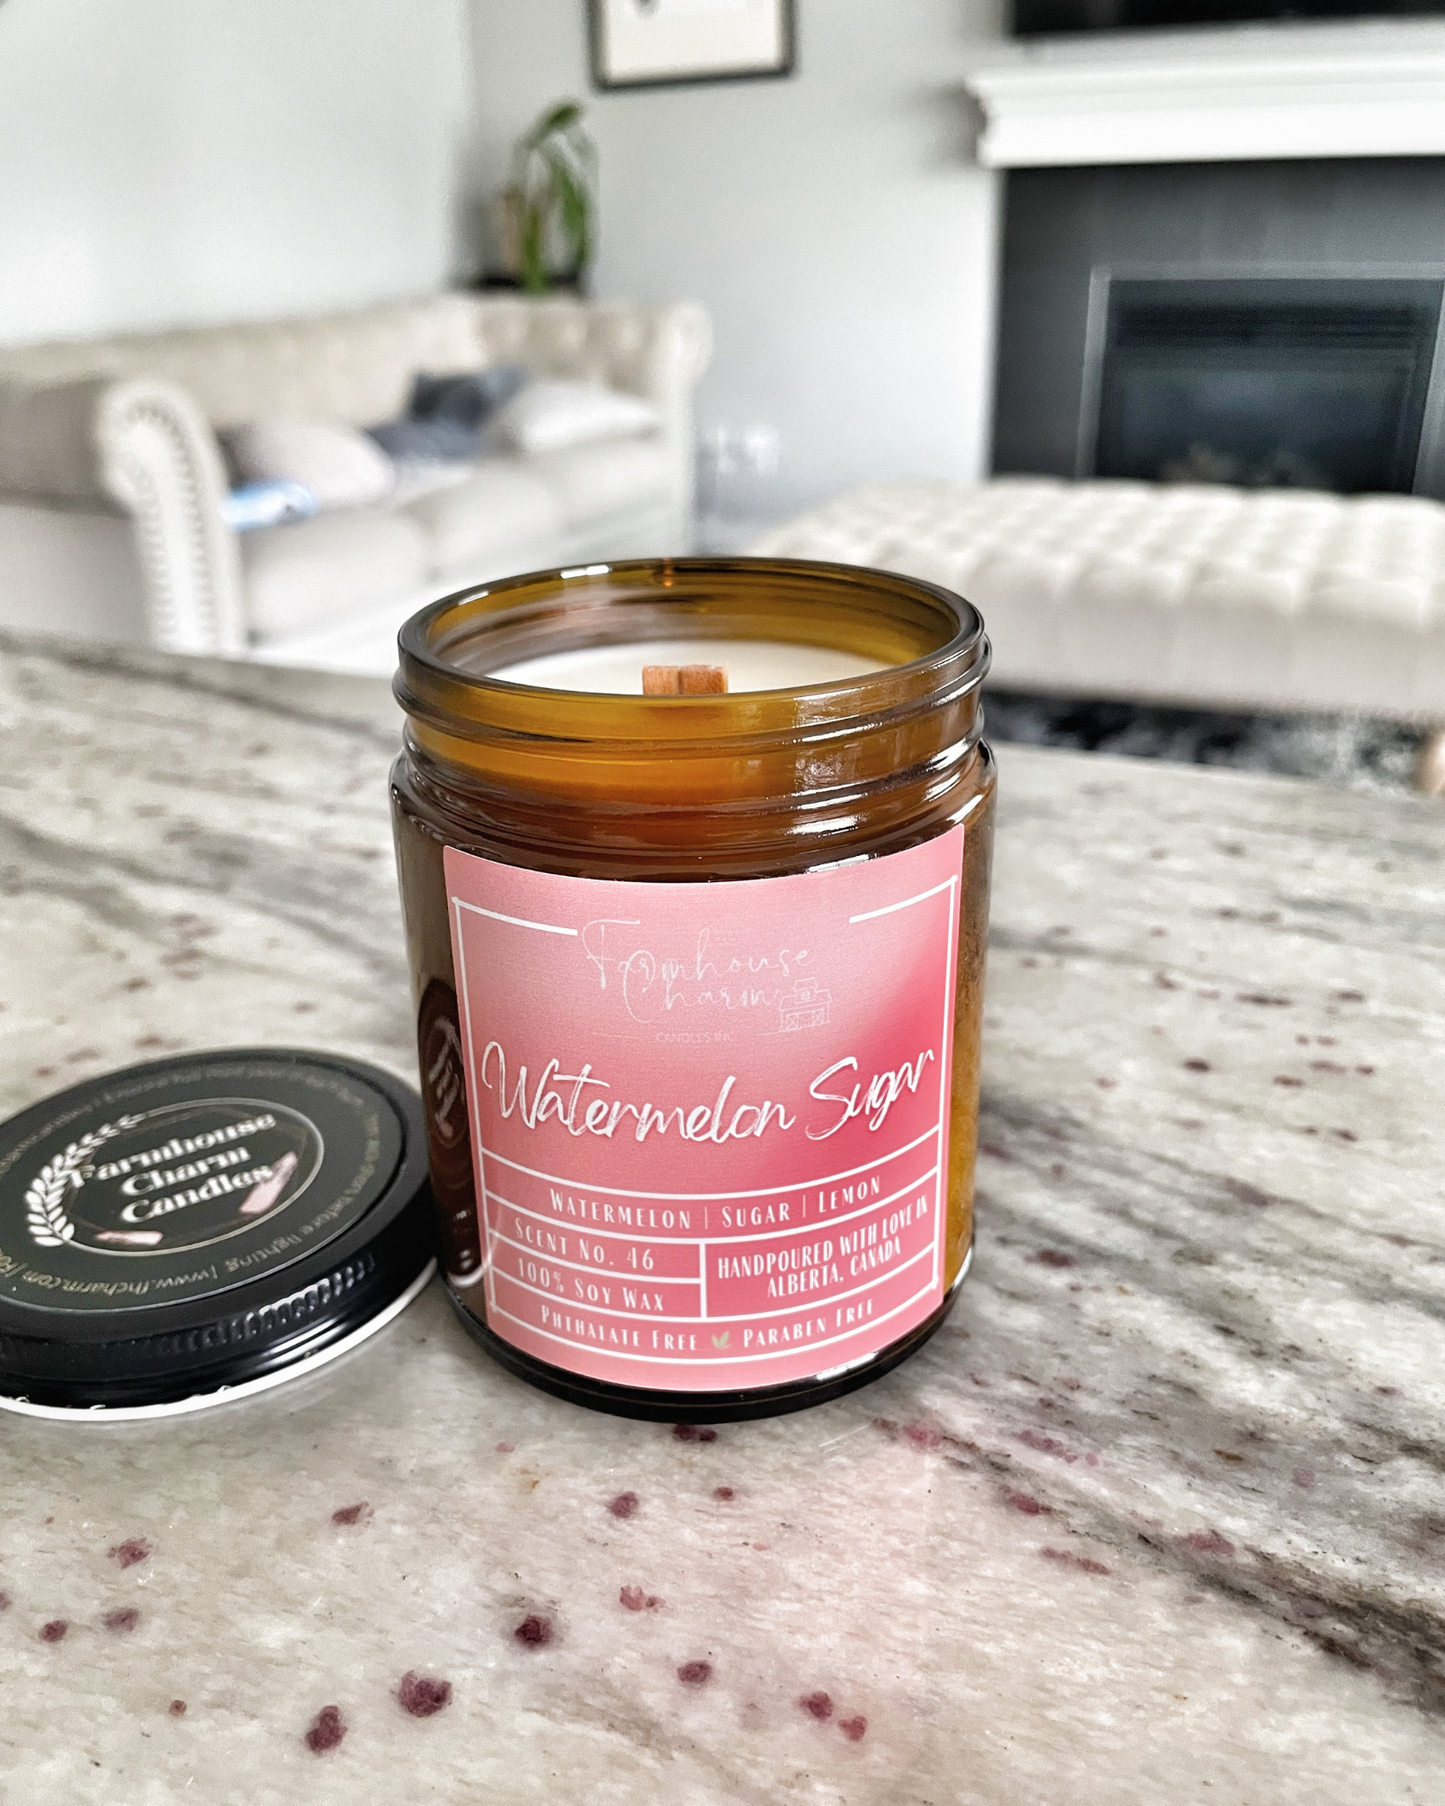 Elevate Your Summer Mood with Watermelon Sugar - Farmhouse Charm Soy Candle.  Bring the summer season into your home with our Watermelon Sugar - Farmhouse Charm Soy Candle! Infused with refreshing and bright scent of watermelon, spring water, and lemon, this candle will add a touch of summer to your living space. www.farmhousecharmcandles.com